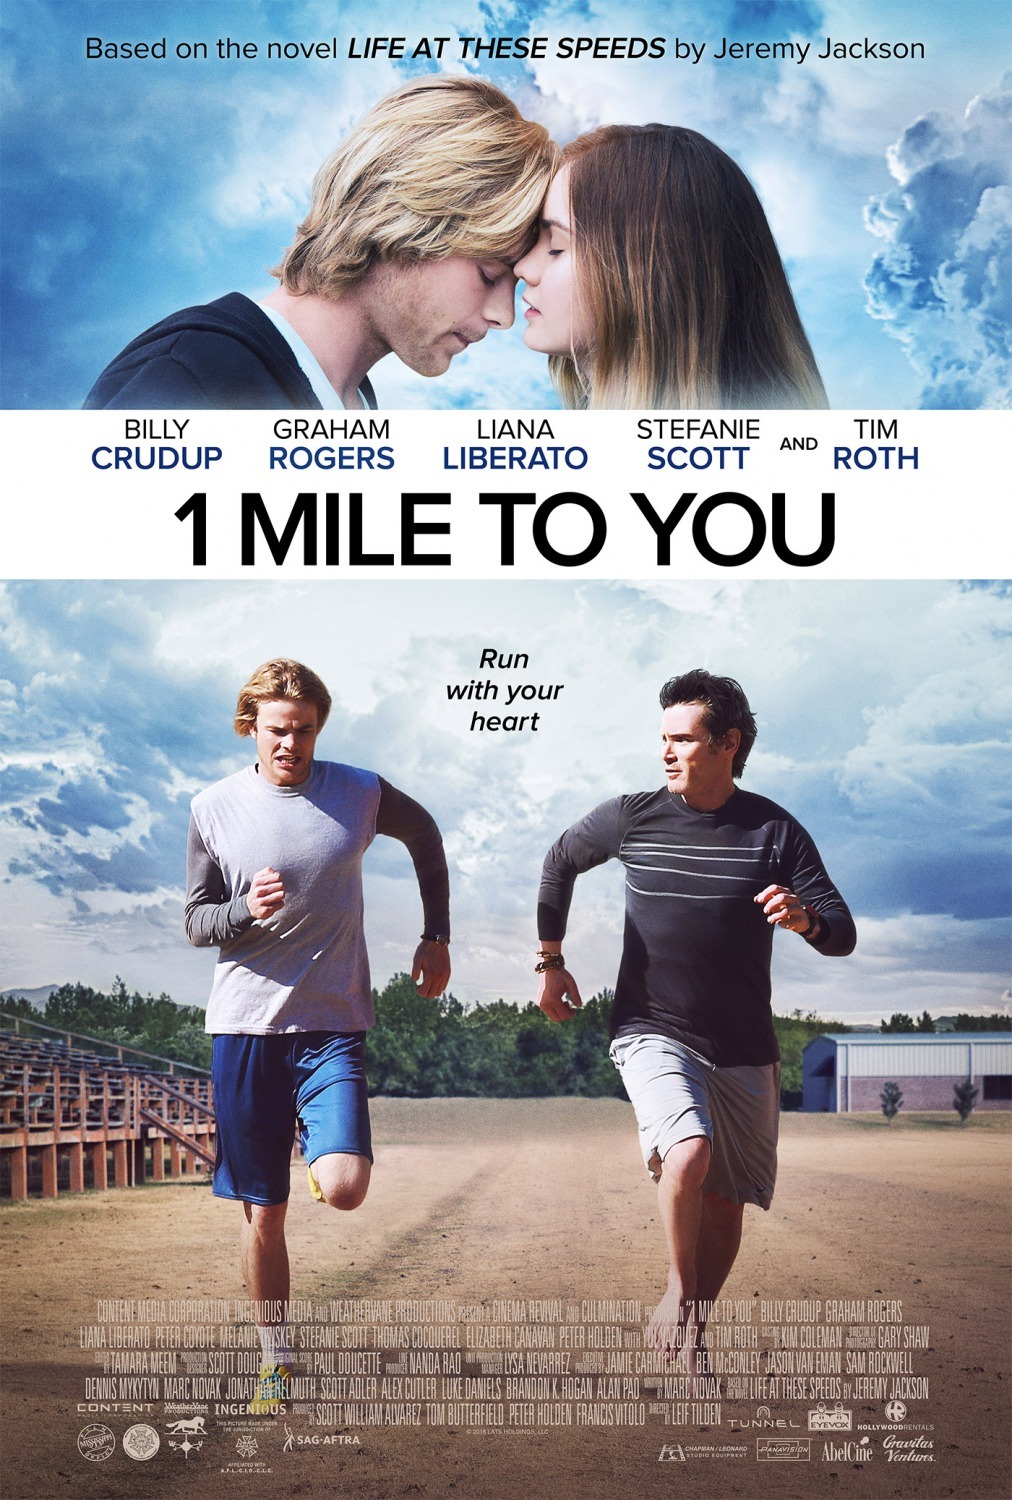 Life at These Speeds (1 Mile to You) (2017) Graham Rogers